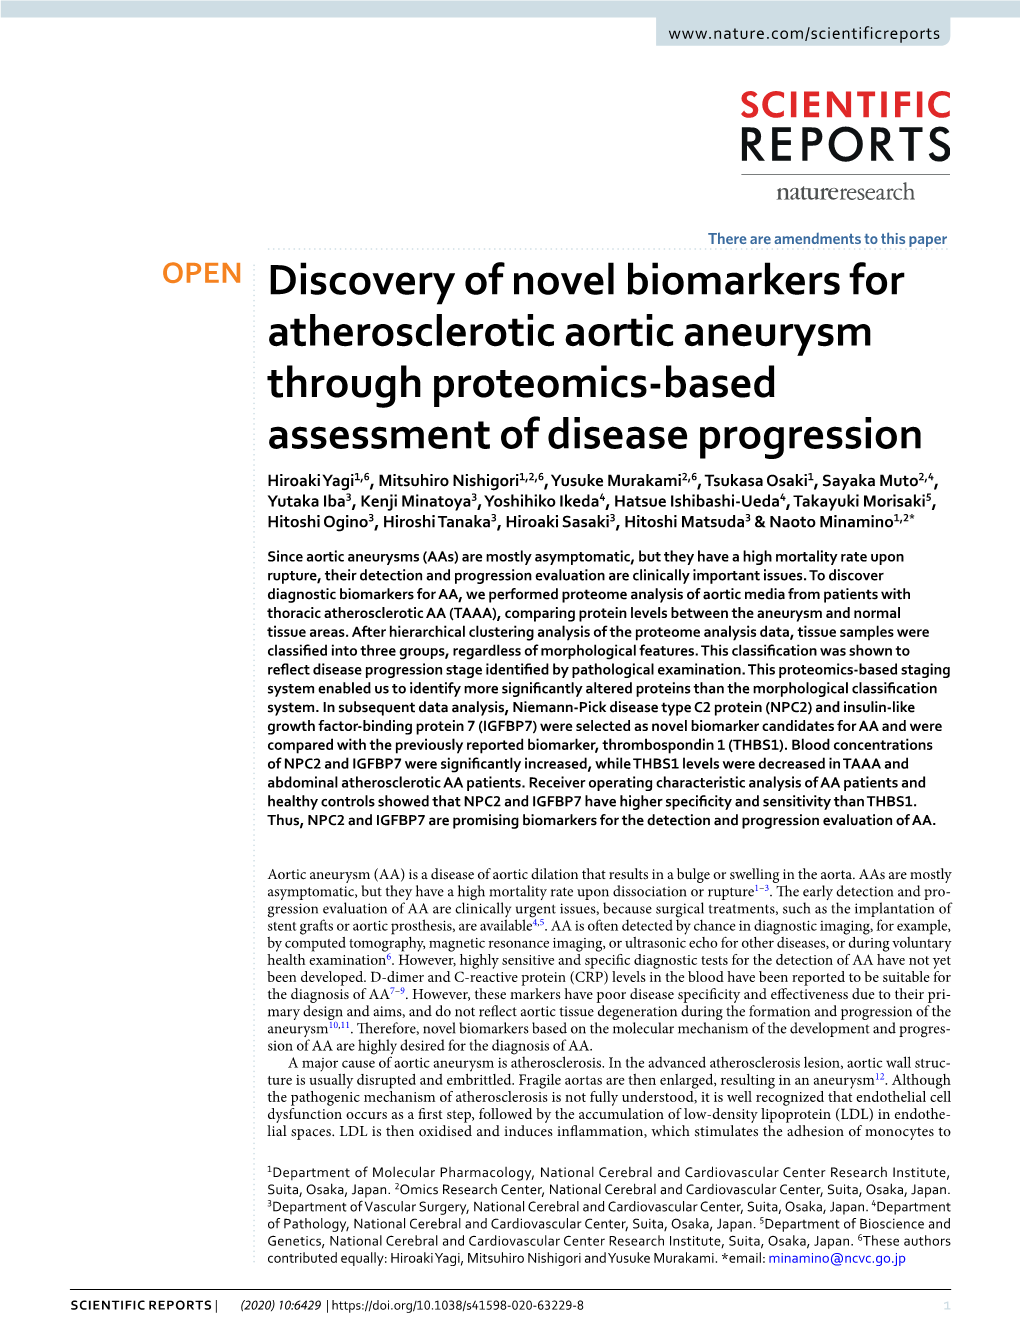 Discovery of Novel Biomarkers for Atherosclerotic Aortic Aneurysm